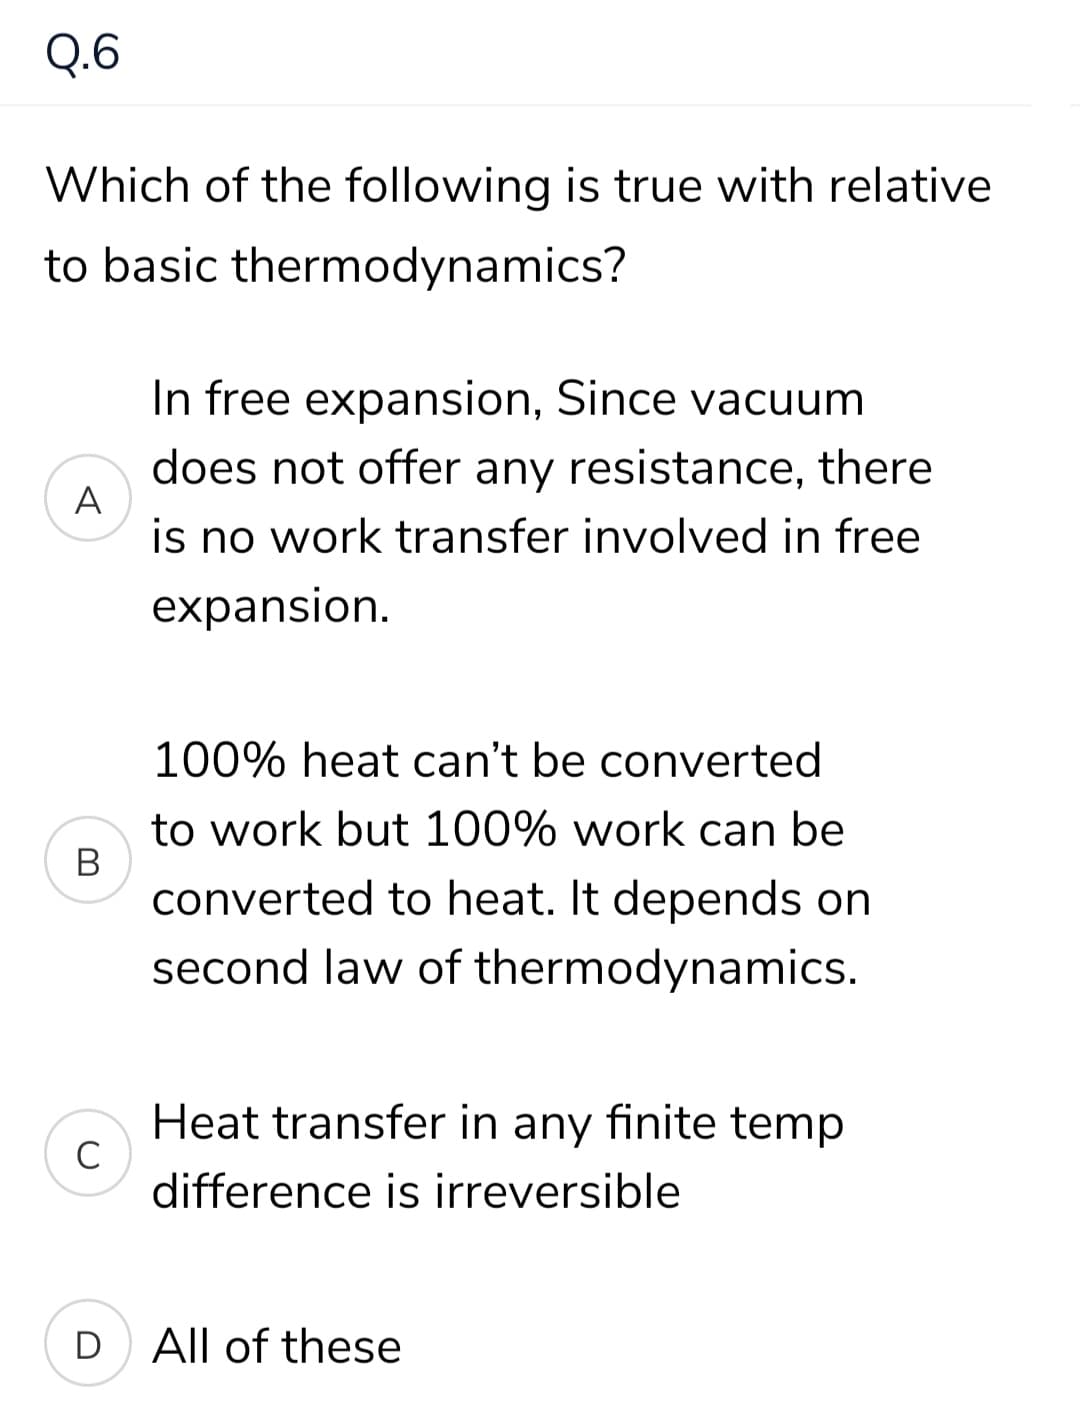 Q.6
Which of the following is true with relative
to basic thermodynamics?
In free expansion, Since vacuum
does not offer any resistance, there
A
is no work transfer involved in free
expansion.
100% heat can't be converted
to work but 100% work can be
converted to heat. It depends on
second law of thermodynamics.
Heat transfer in any finite temp
difference is irreversible
D
All of these
